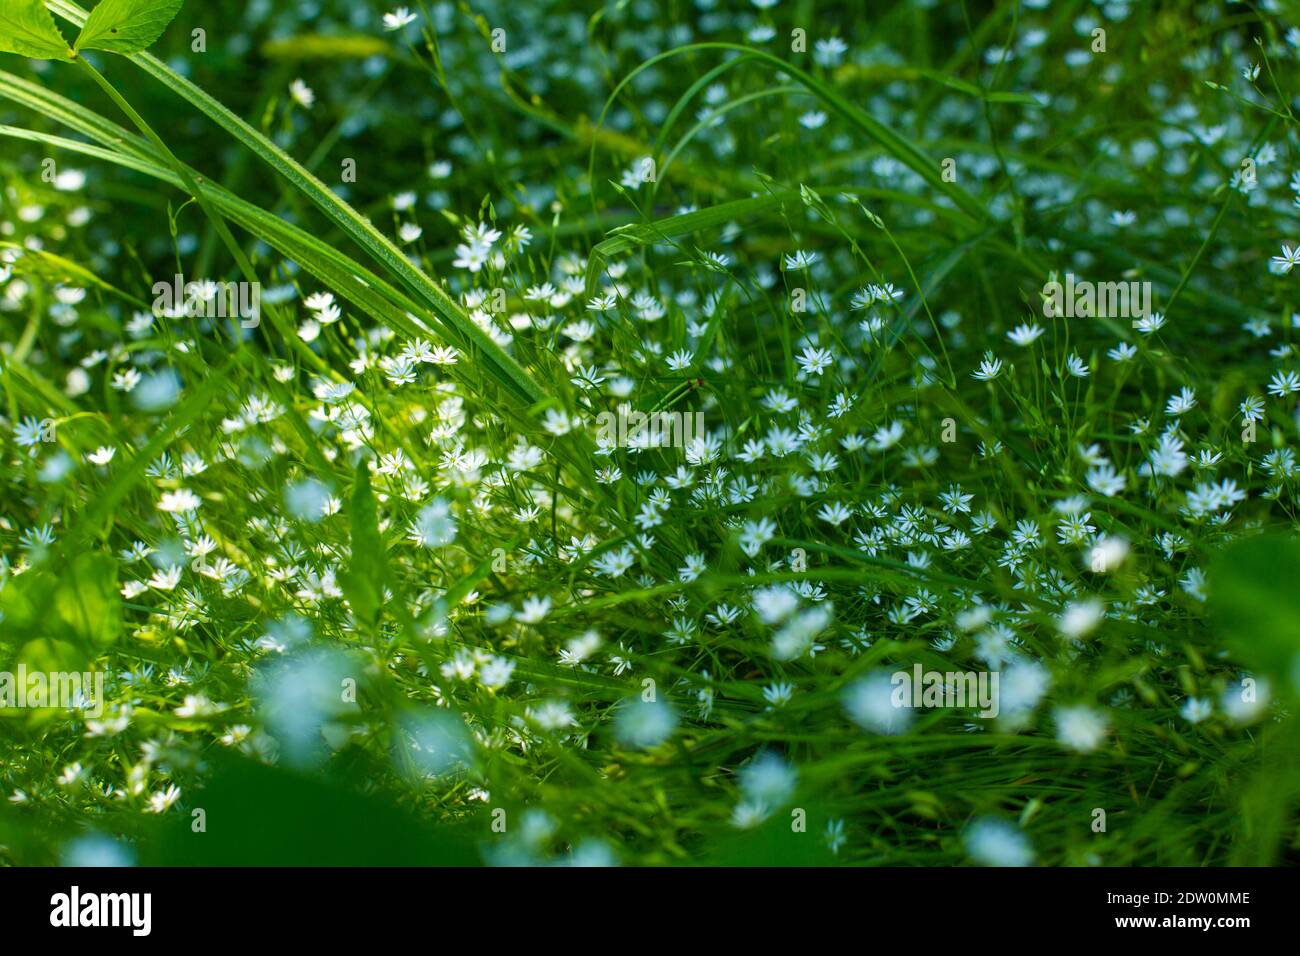 A green field with delicate small white blooming flowers. Lightness and greenery. Spring. Stock Photo